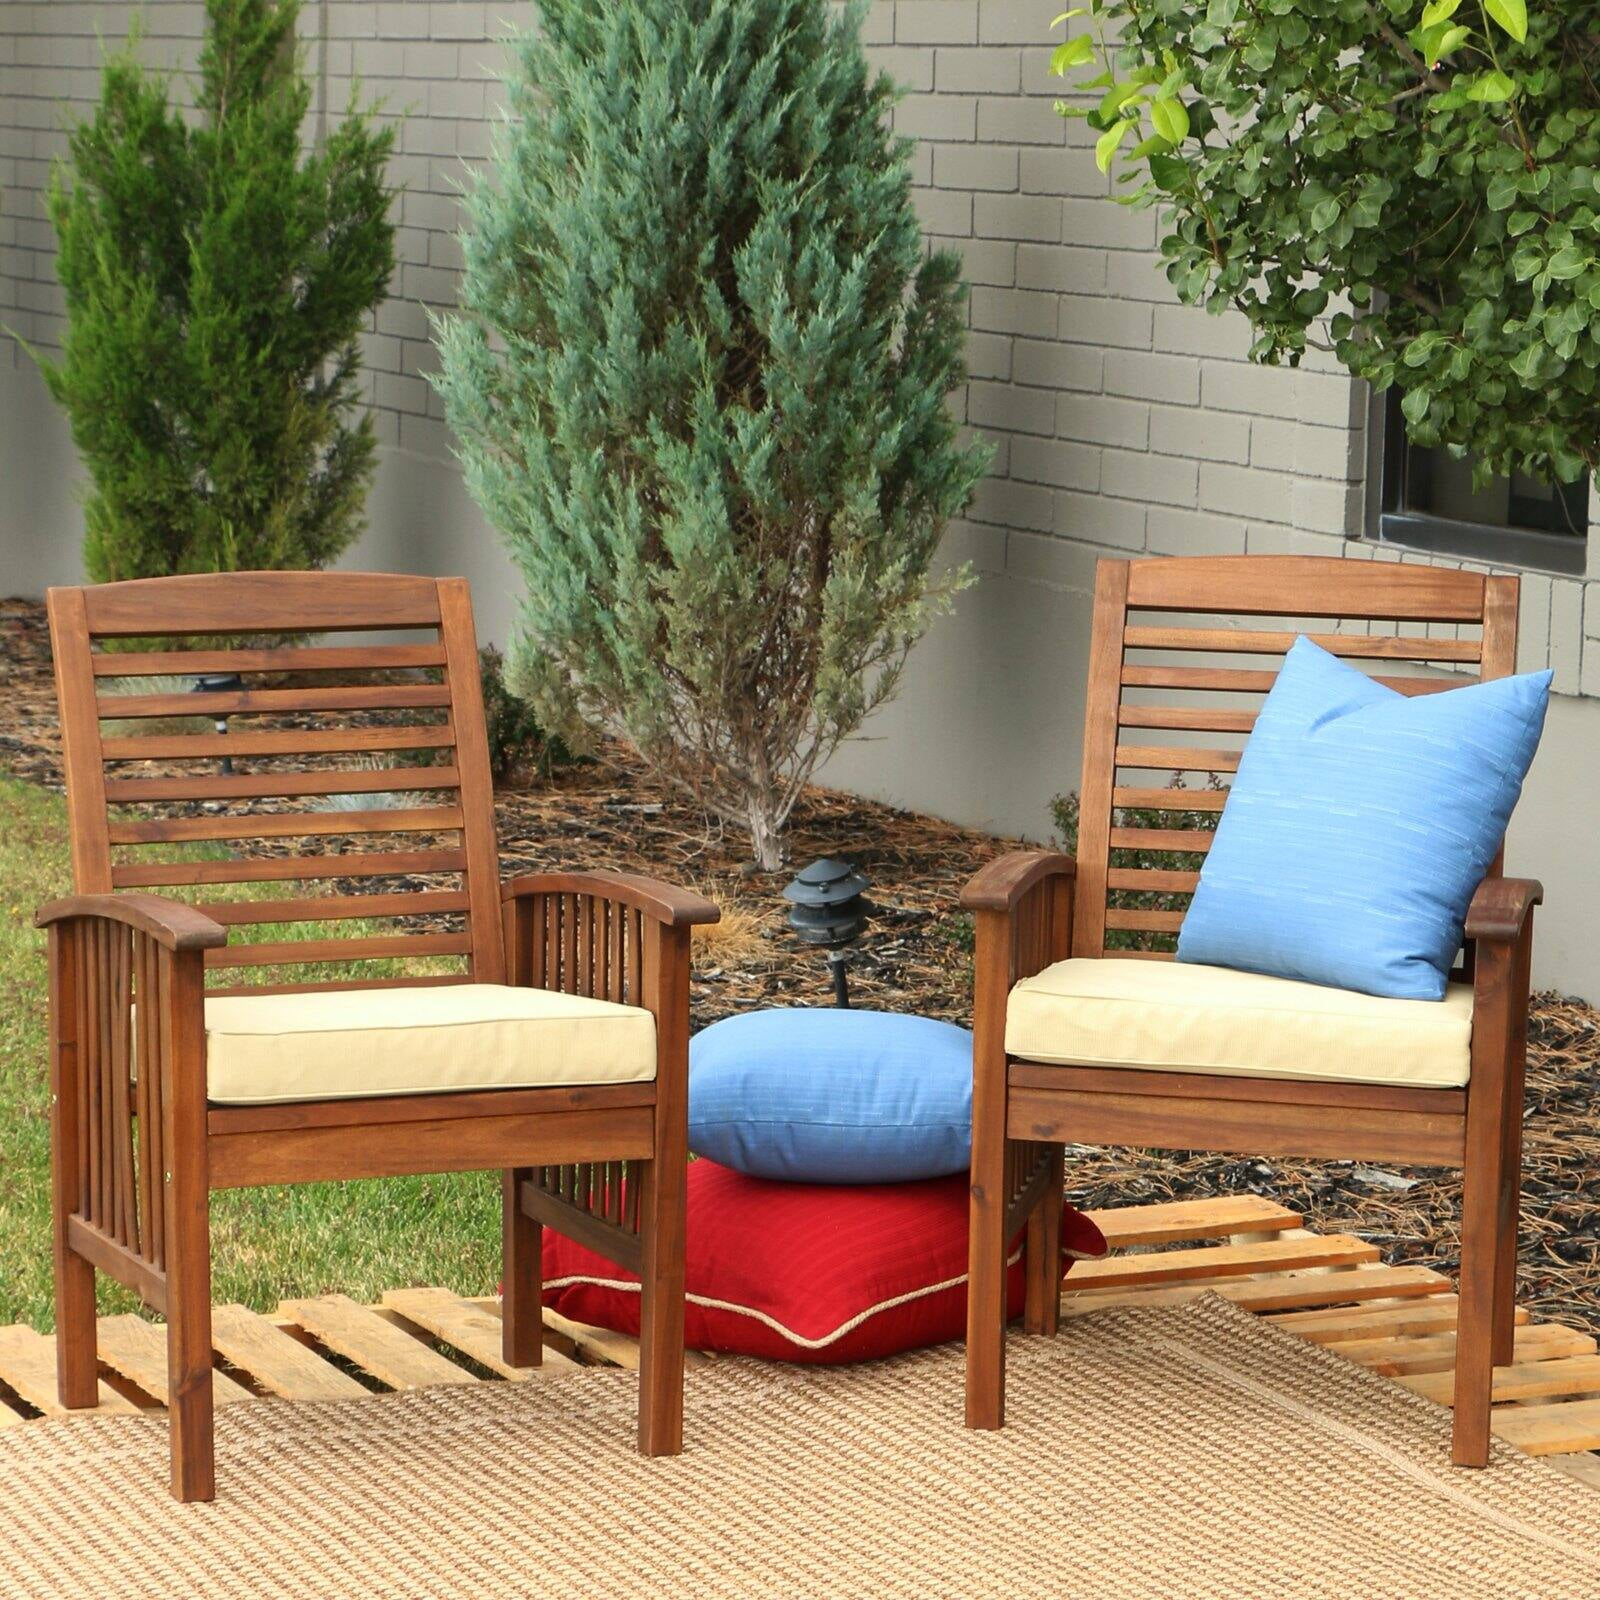 Manor Park Acacia Wood Patio Chairs, Manor Park Outdoor Wood Patio Chairs With Cushions